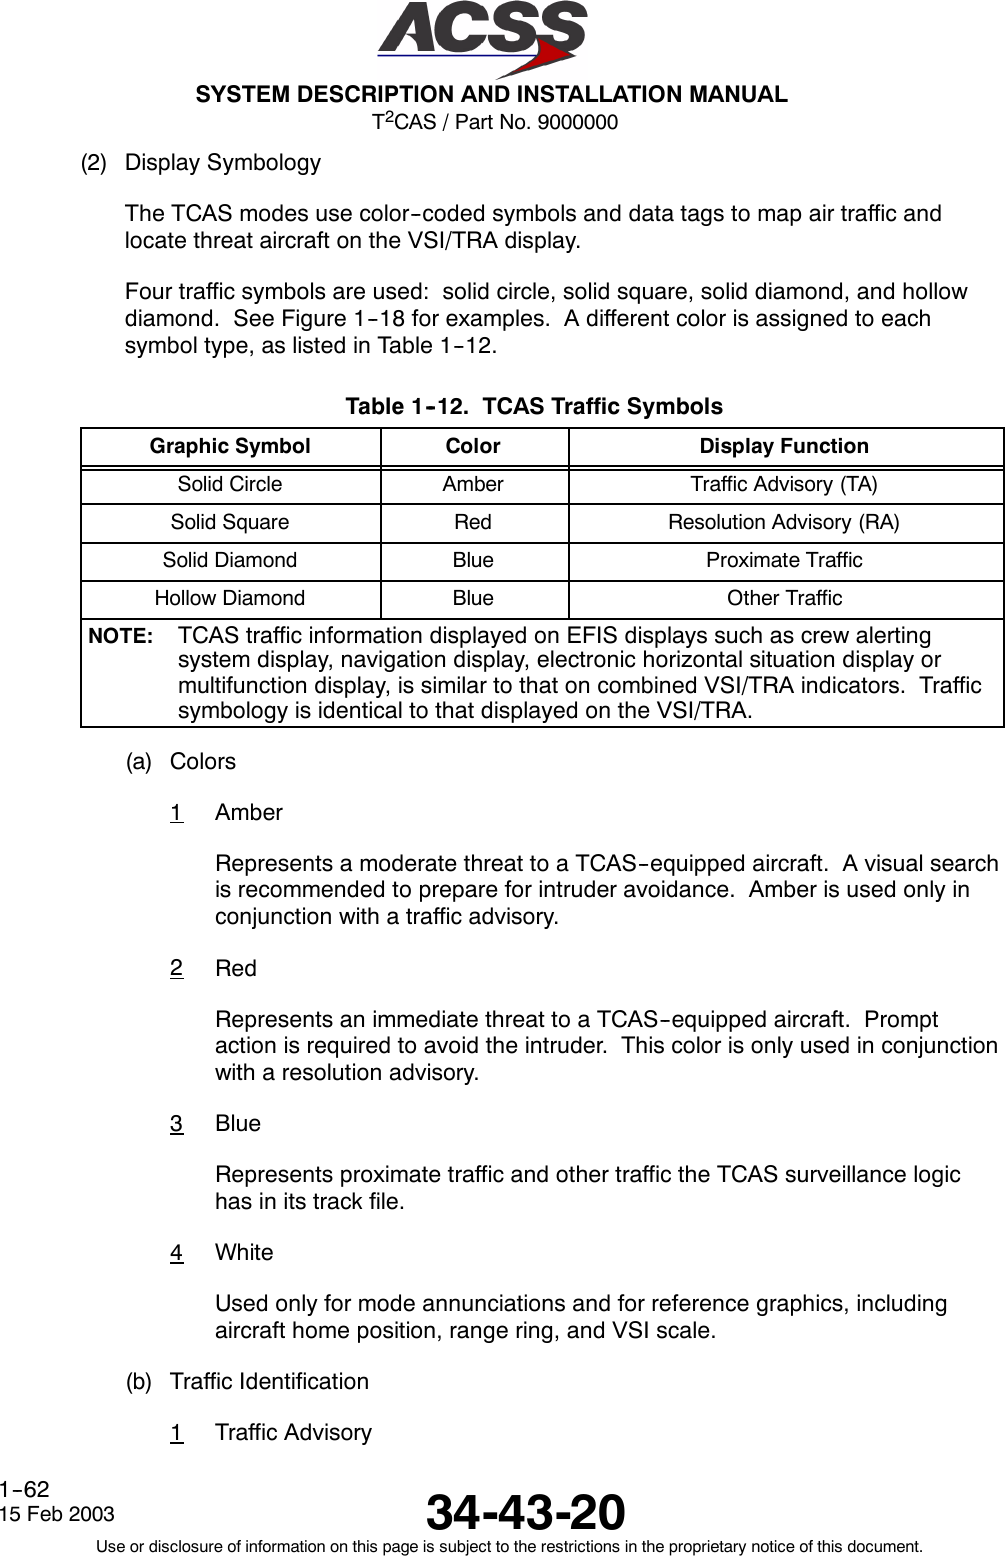 T2CAS / Part No. 9000000SYSTEM DESCRIPTION AND INSTALLATION MANUAL34-43-2015 Feb 2003Use or disclosure of information on this page is subject to the restrictions in the proprietary notice of this document.1--62(2) Display SymbologyThe TCAS modes use color--coded symbols and data tags to map air traffic andlocate threat aircraft on the VSI/TRA display.Four traffic symbols are used: solid circle, solid square, solid diamond, and hollowdiamond. See Figure 1--18 for examples. A different color is assigned to eachsymbol type, as listed in Table 1--12.Table 1--12. TCAS Traffic SymbolsGraphic Symbol Color Display FunctionSolid Circle Amber Traffic Advisory (TA)Solid Square Red Resolution Advisory (RA)Solid Diamond Blue Proximate TrafficHollow Diamond Blue Other TrafficNOTE: TCAS traffic information displayed on EFIS displays such as crew alertingsystem display, navigation display, electronic horizontal situation display ormultifunction display, is similar to that on combined VSI/TRA indicators. Trafficsymbology is identical to that displayed on the VSI/TRA.(a) Colors1AmberRepresents a moderate threat to a TCAS--equipped aircraft. A visual searchis recommended to prepare for intruder avoidance. Amber is used only inconjunction with a traffic advisory.2RedRepresents an immediate threat to a TCAS--equipped aircraft. Promptaction is required to avoid the intruder. This color is only used in conjunctionwith a resolution advisory.3BlueRepresents proximate traffic and other traffic the TCAS surveillance logichas in its track file.4WhiteUsed only for mode annunciations and for reference graphics, includingaircraft home position, range ring, and VSI scale.(b) Traffic Identification1Traffic Advisory